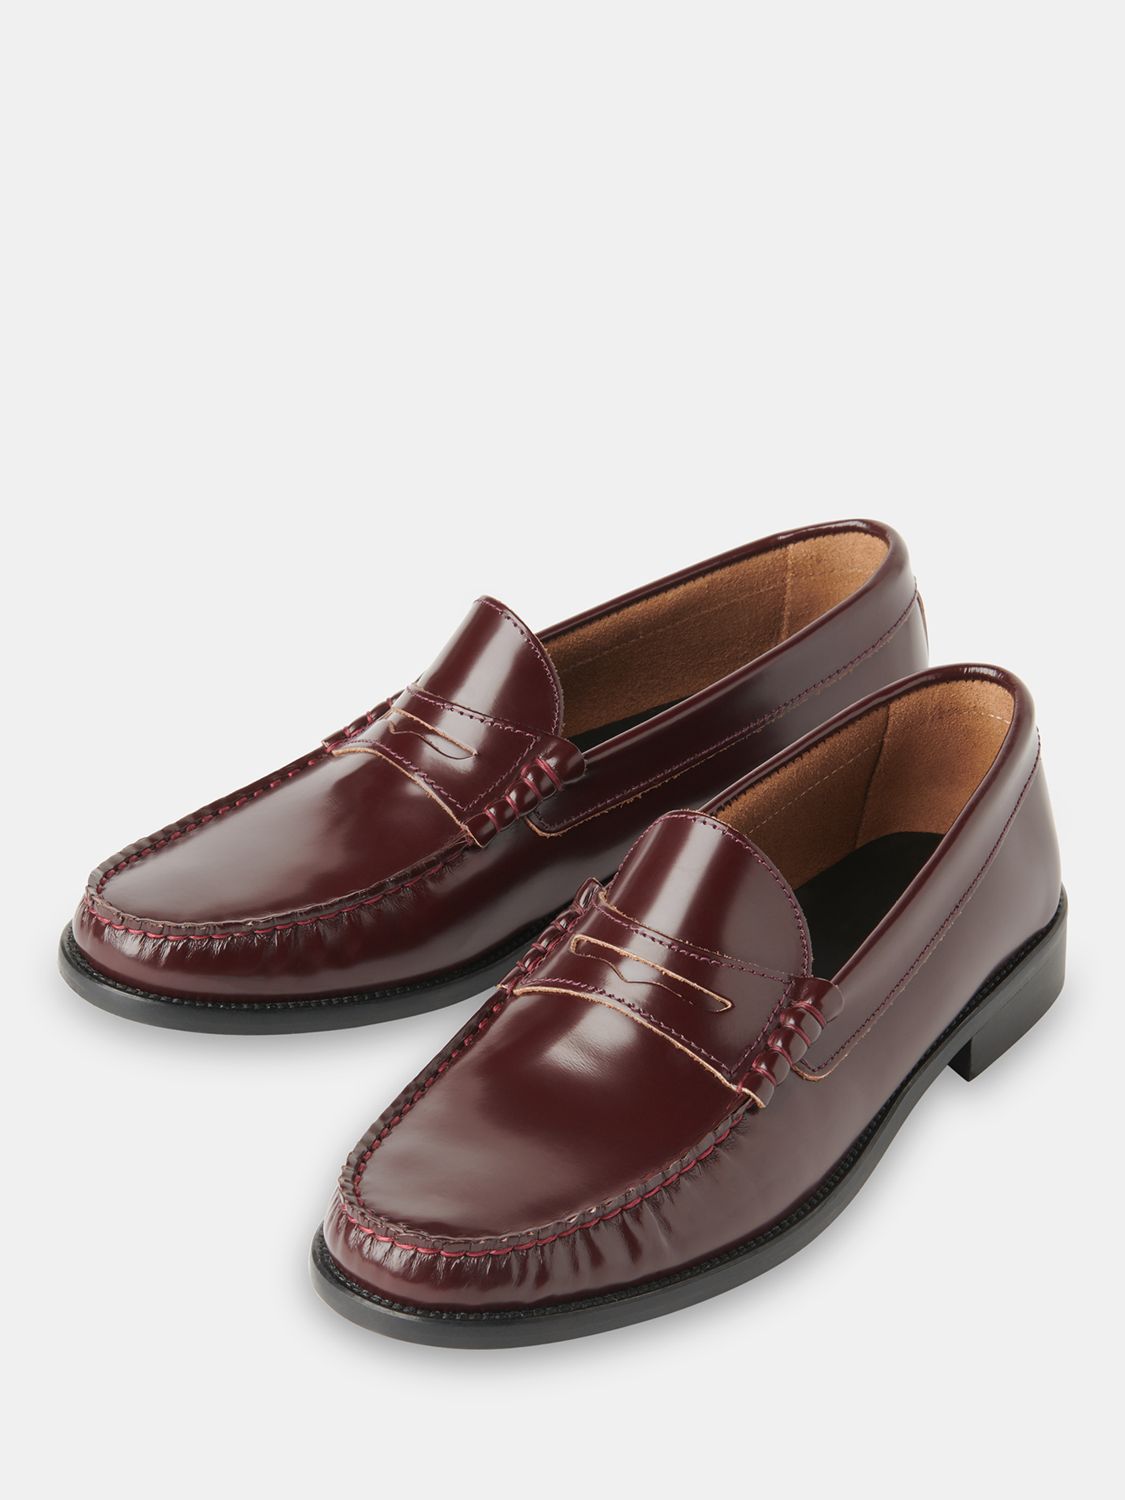 Whistles Manny Slim Leather Loafers. Burgundy at John Lewis & Partners